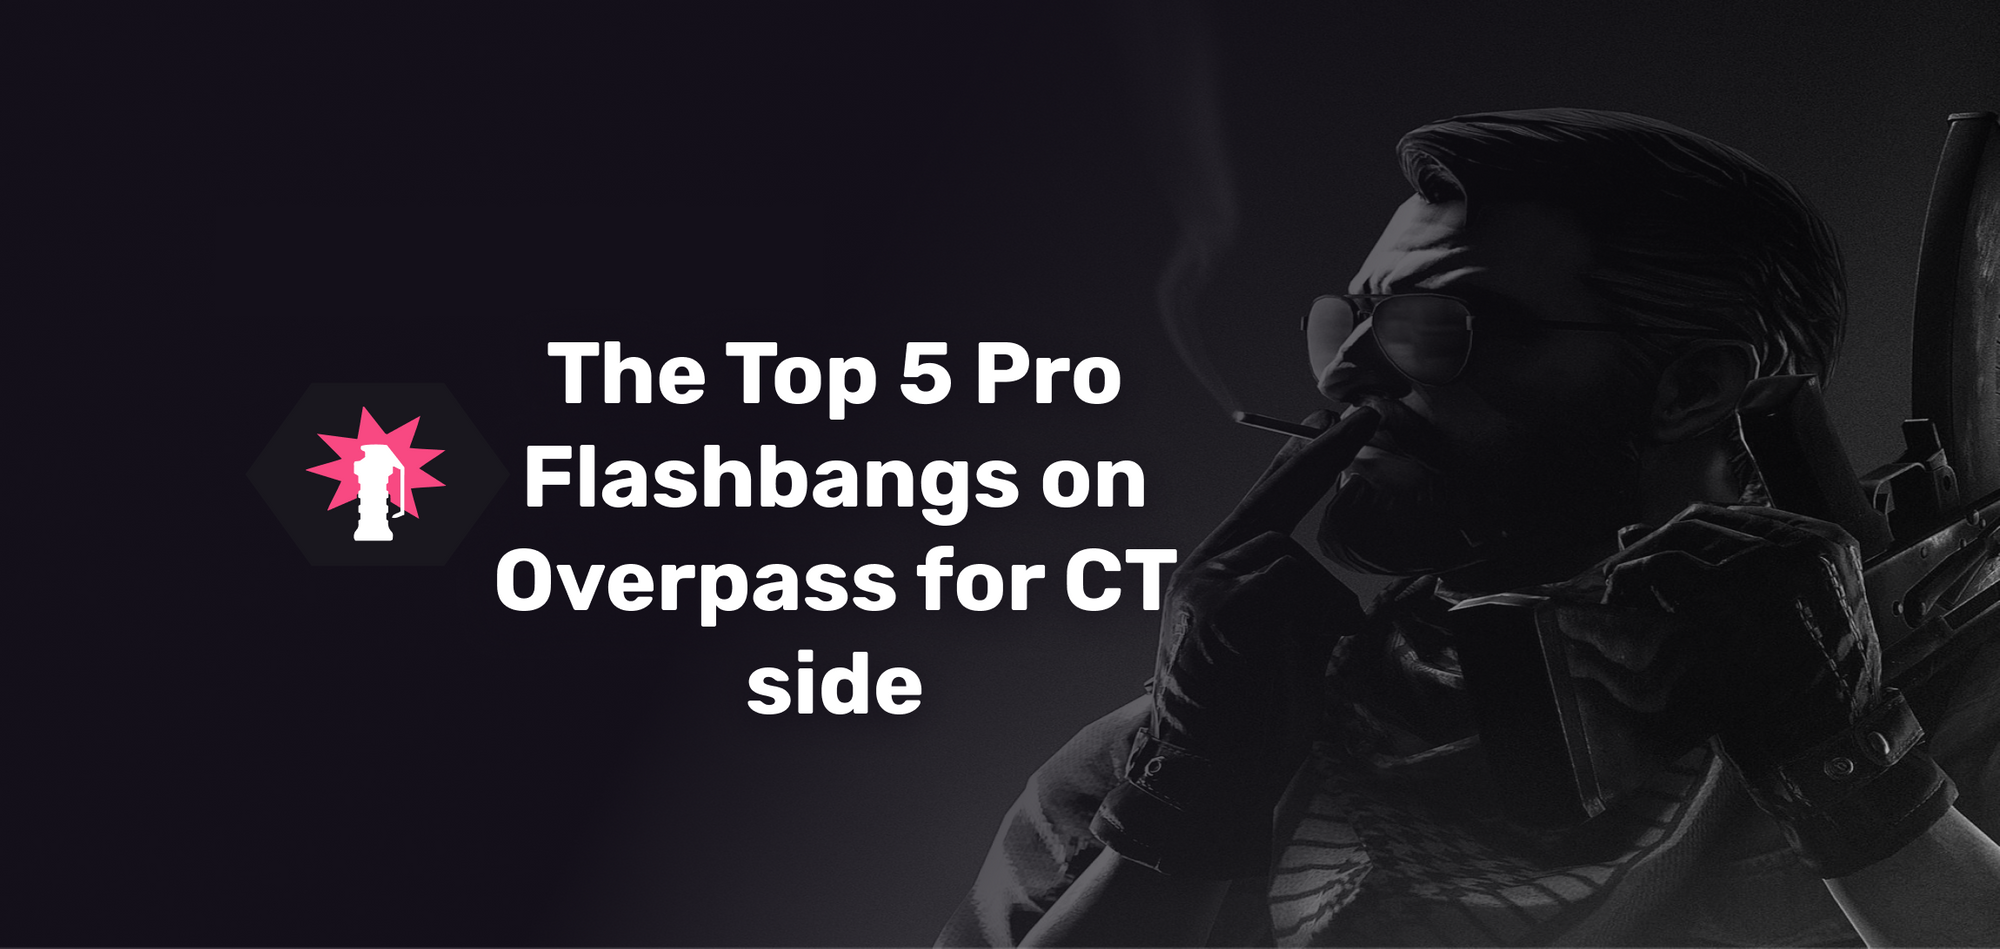 The Top 5 Pro Flashbangs on Overpass for CT side